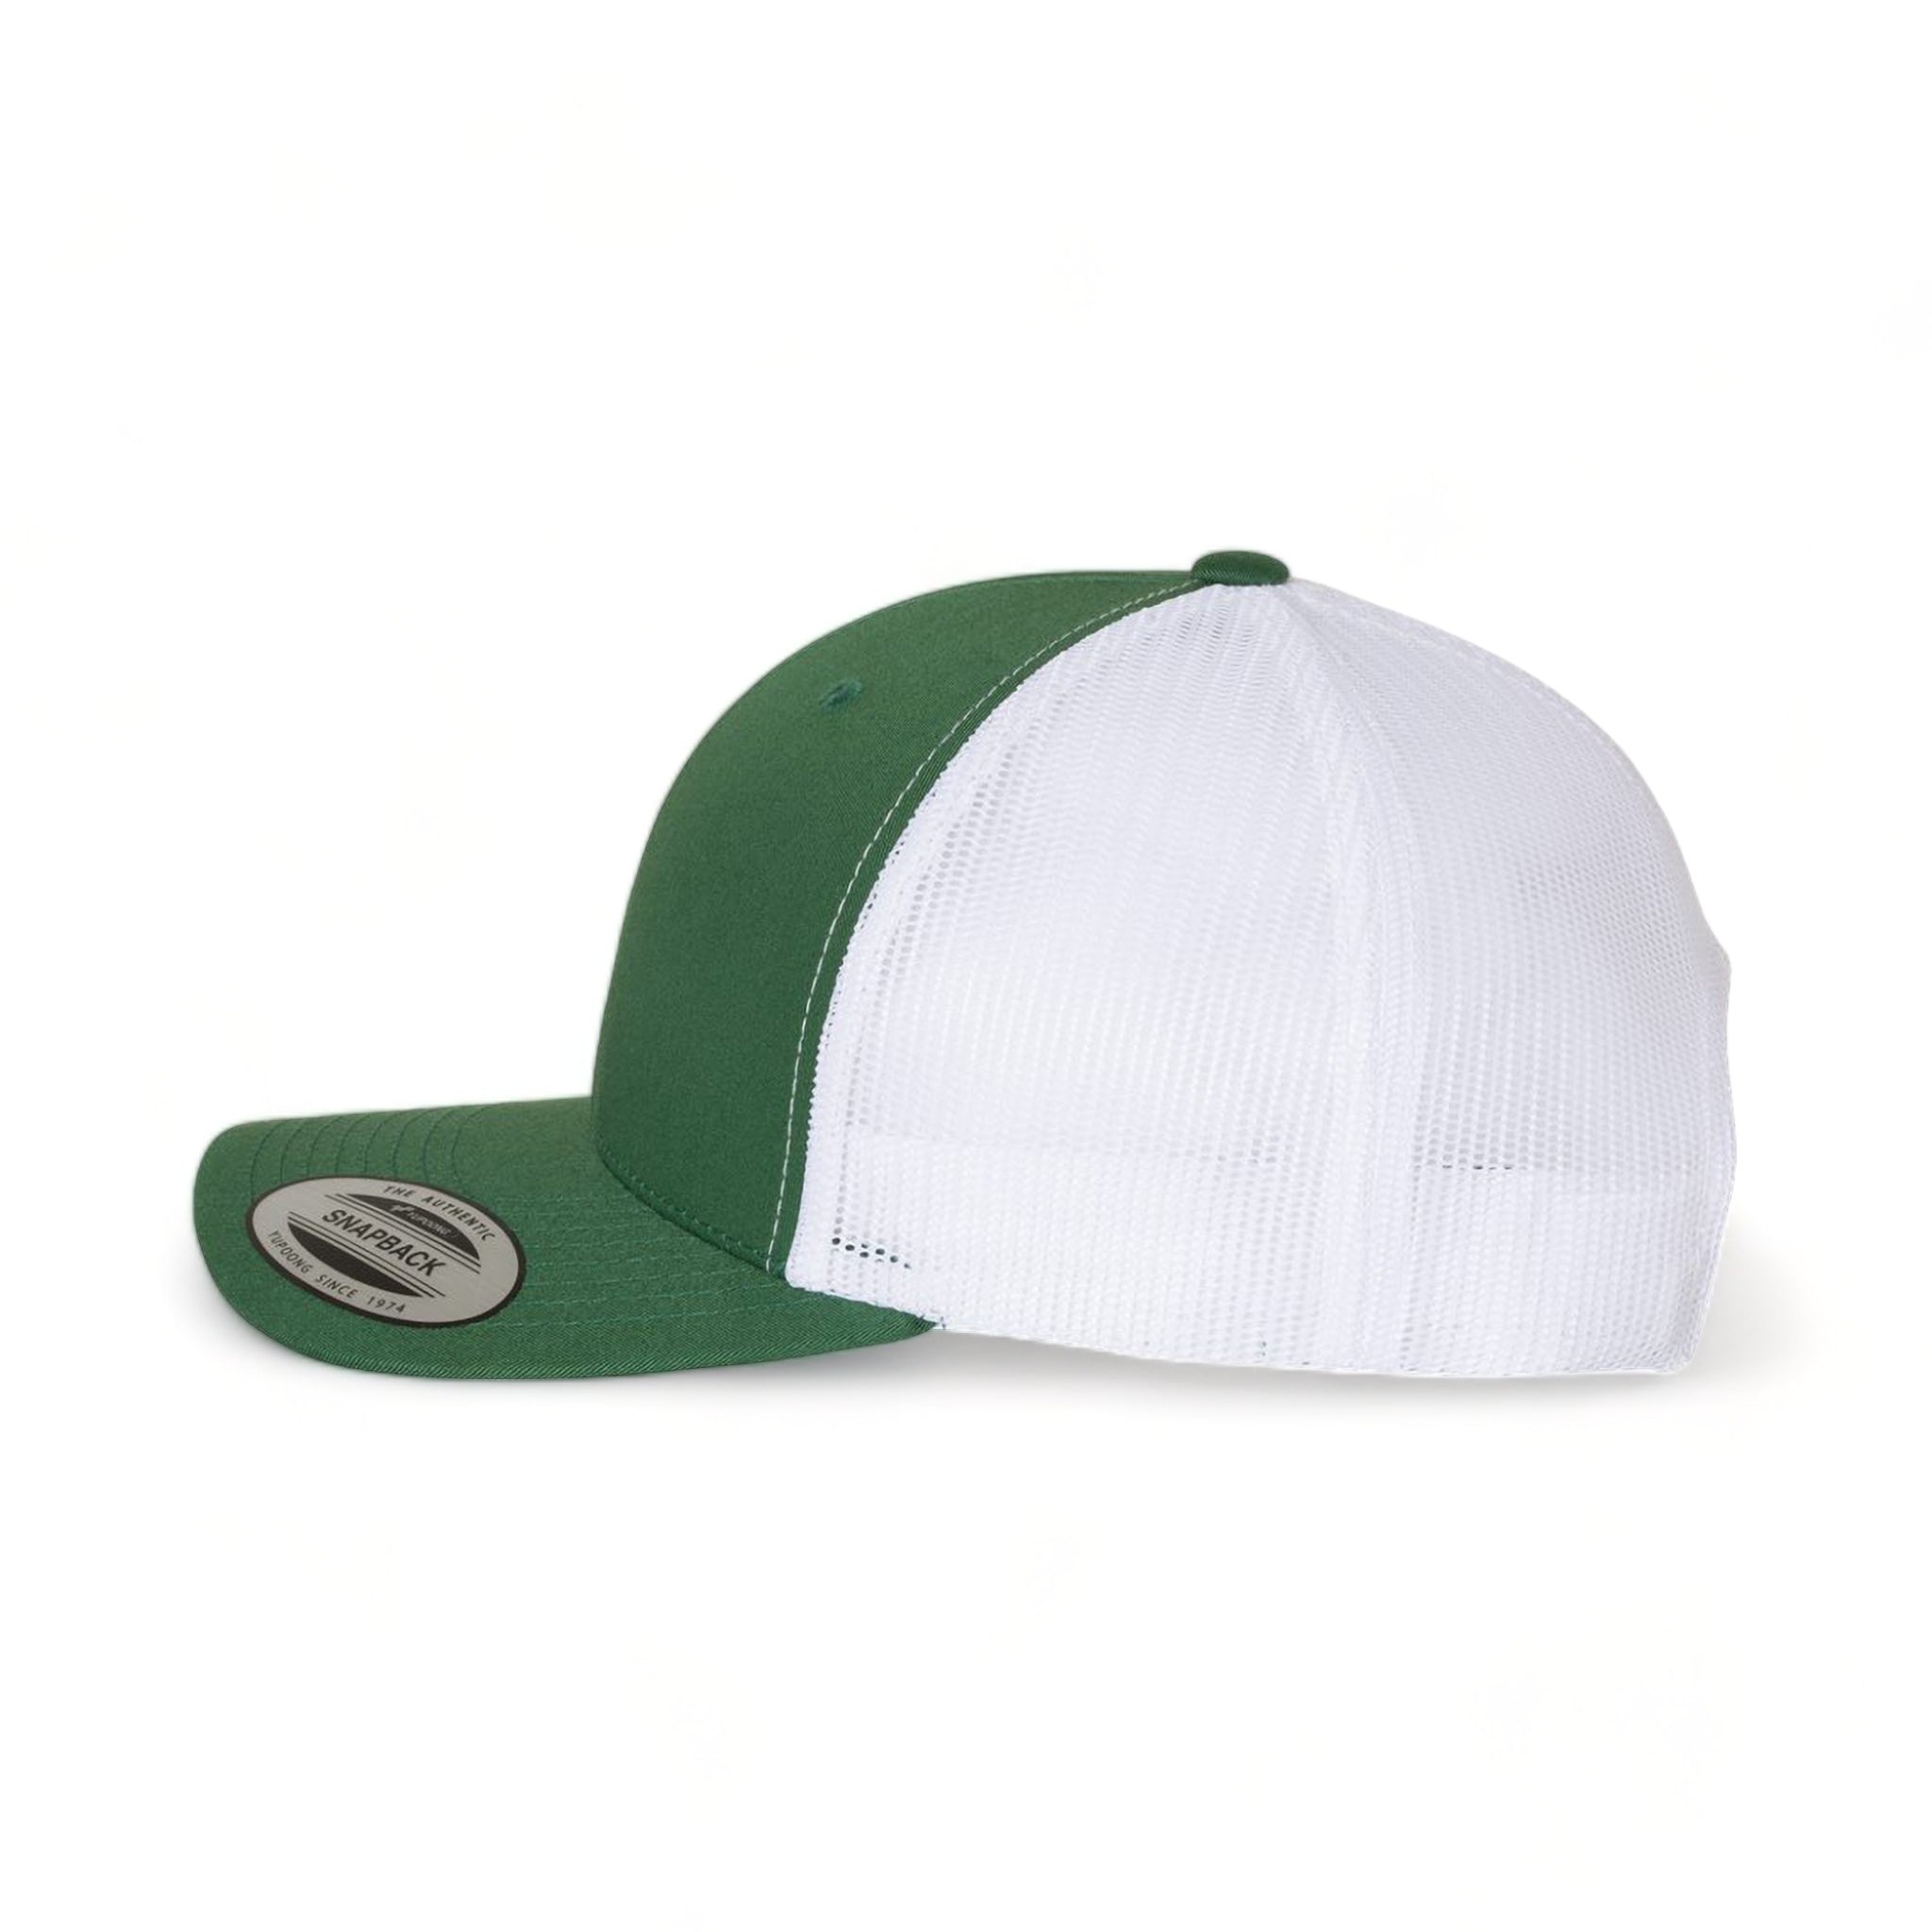 Side view of YP Classics 6606 custom hat in evergreen and white